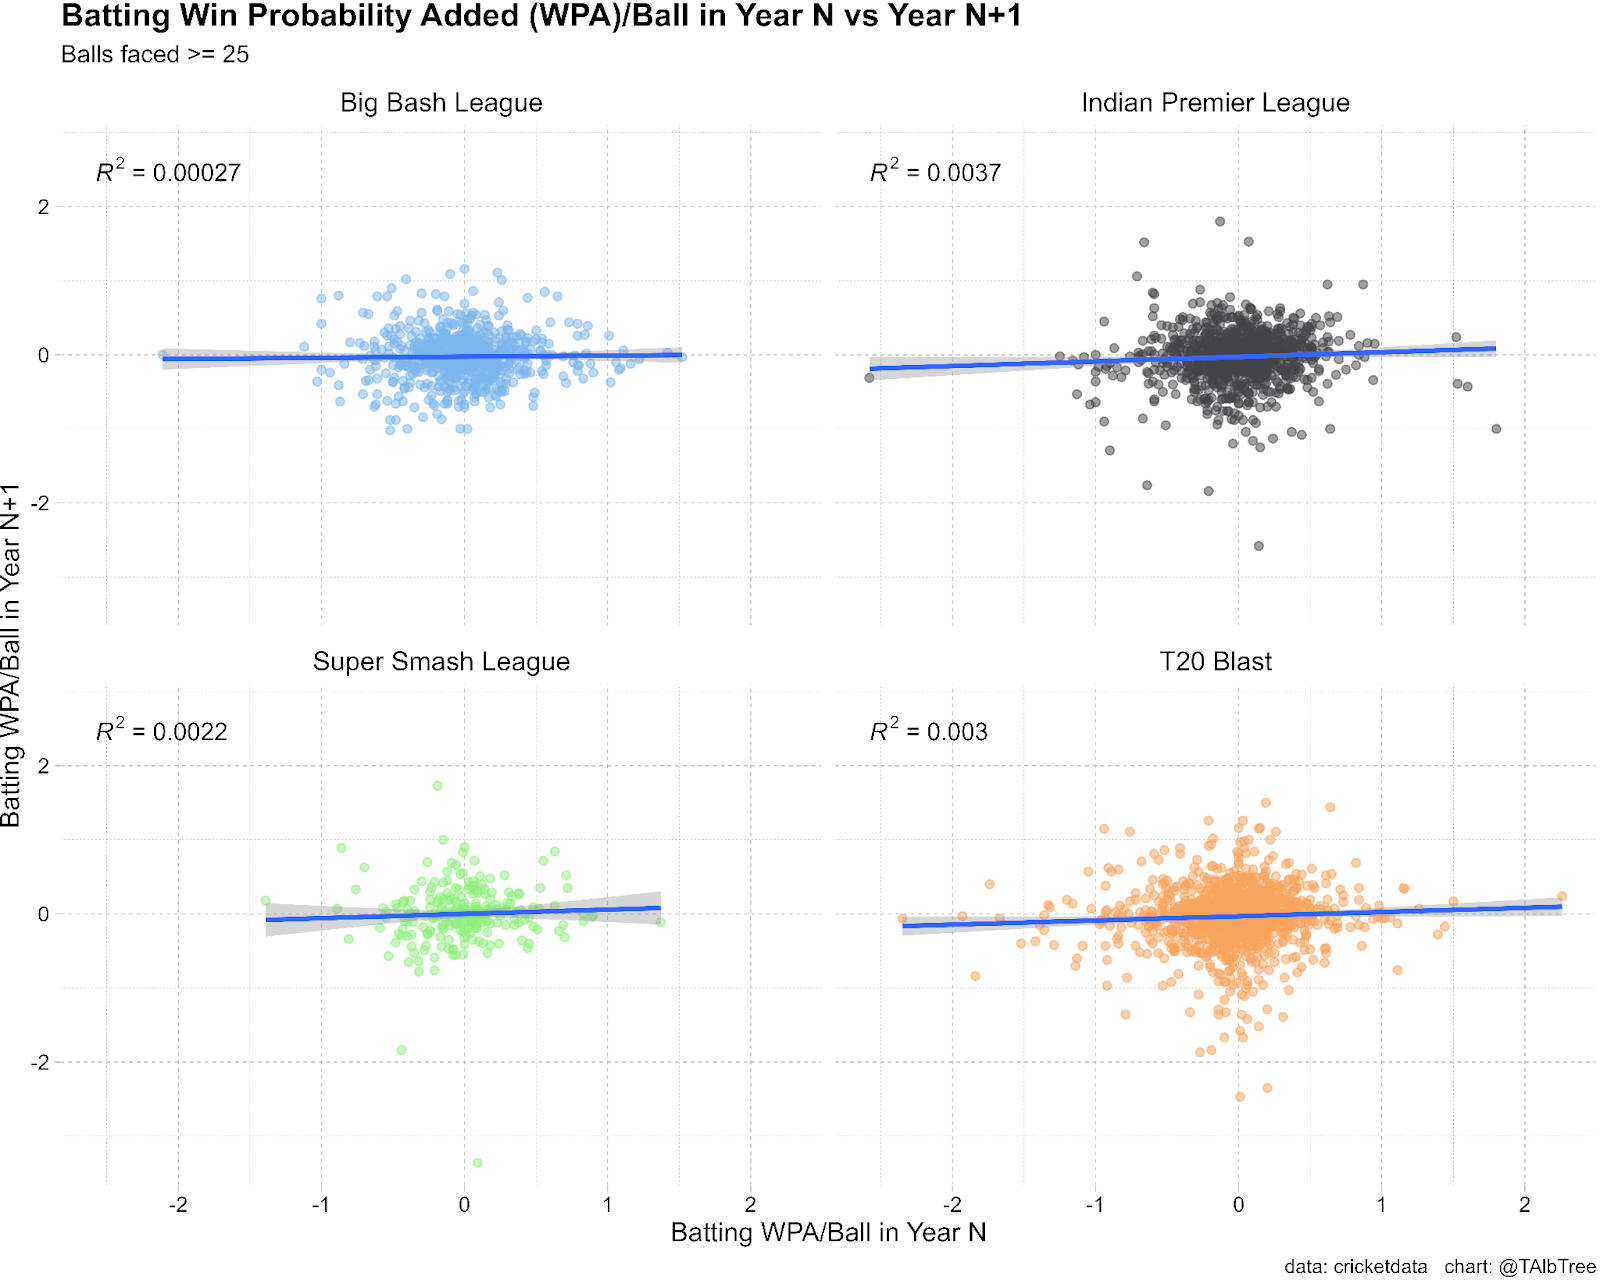 4 scatter plots of batting WPA per ball in year N and Year N +1 across the four major Twenty20 competitions that have played more than one year (Big Bash, Indian Premier League, Super Smash League, T20 Blast). No correlation